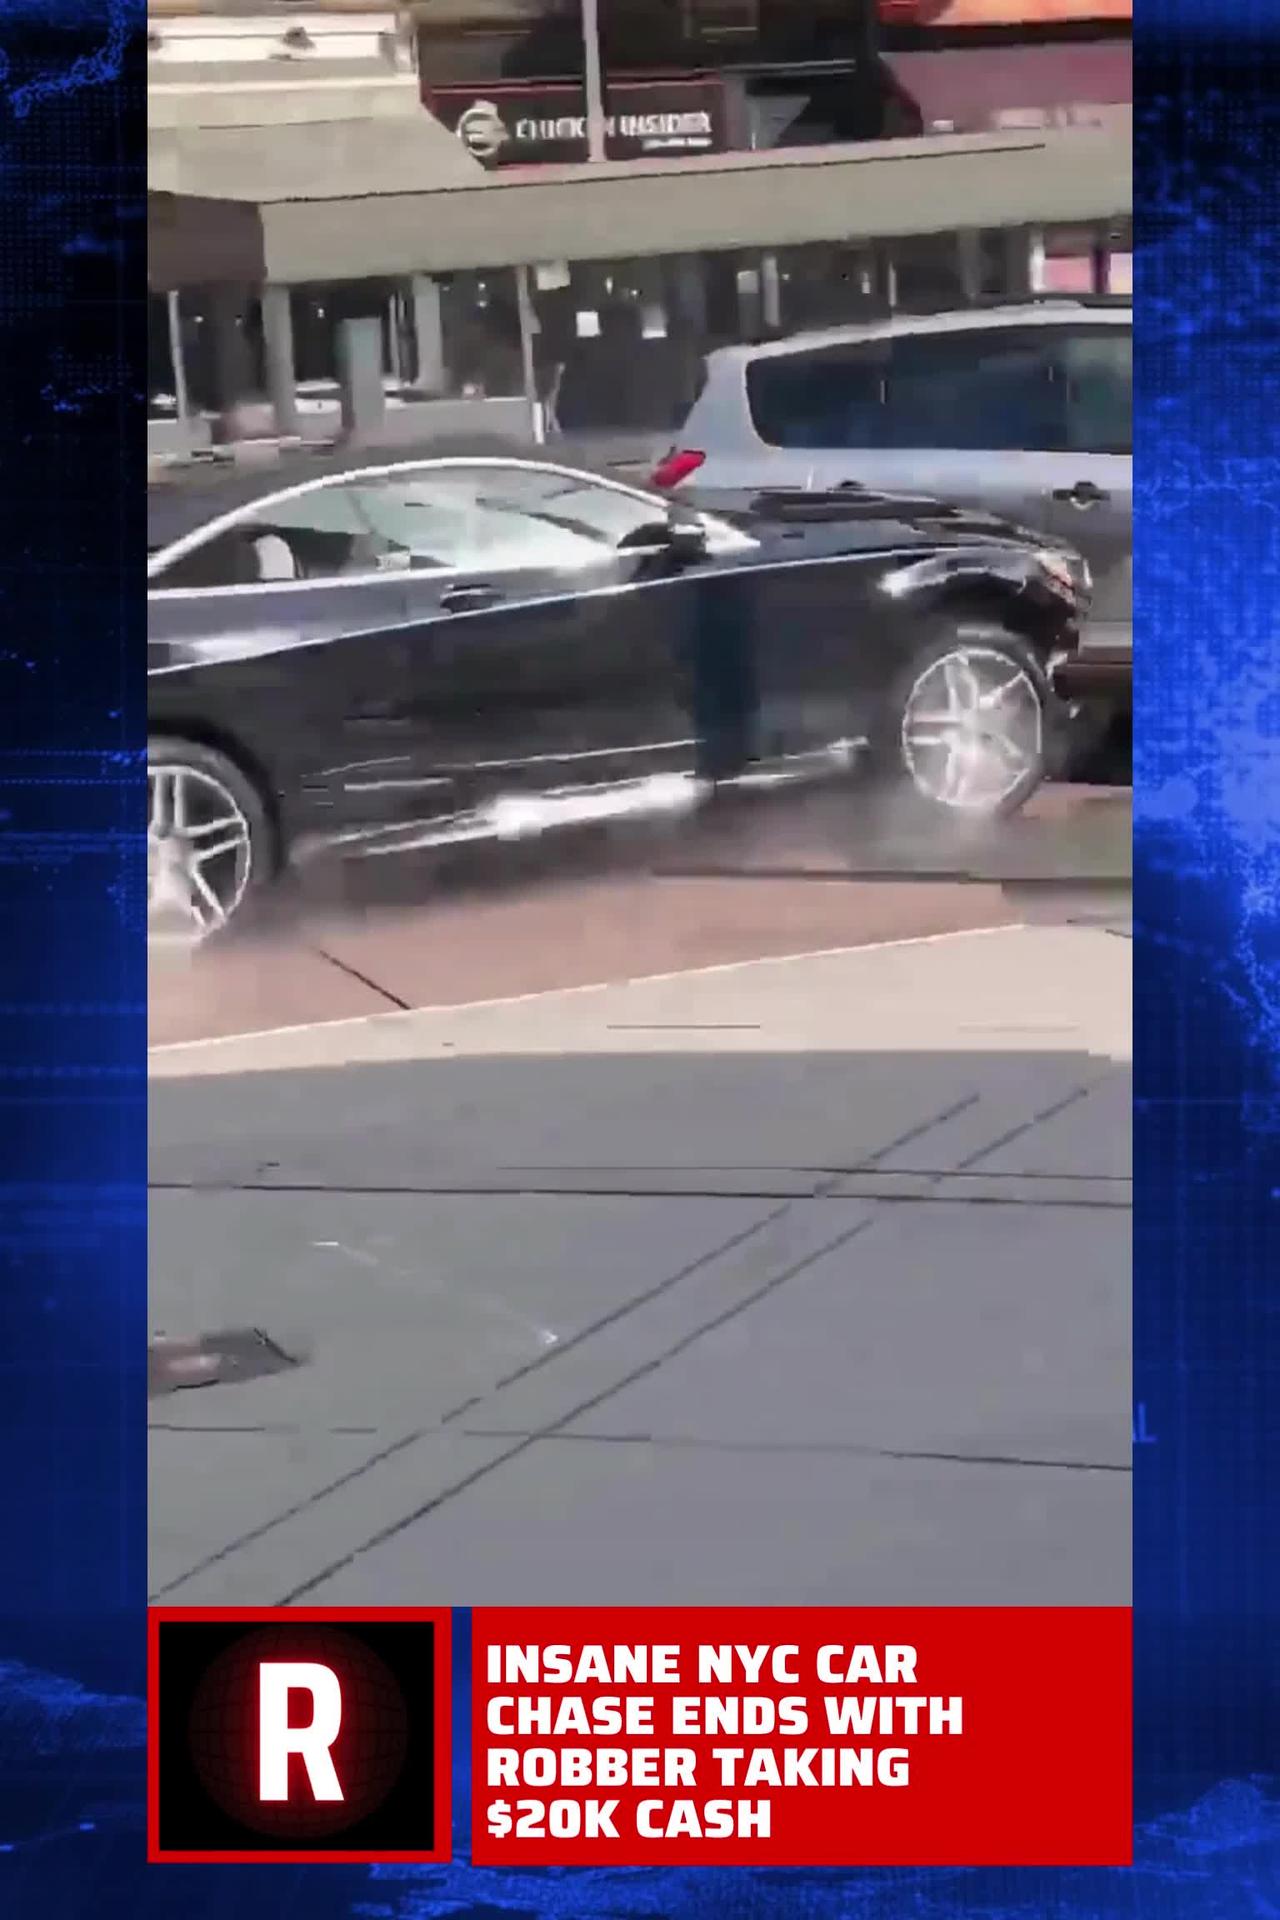 Insane NYC Car Chase Ends with Robber Taking $20k Cash